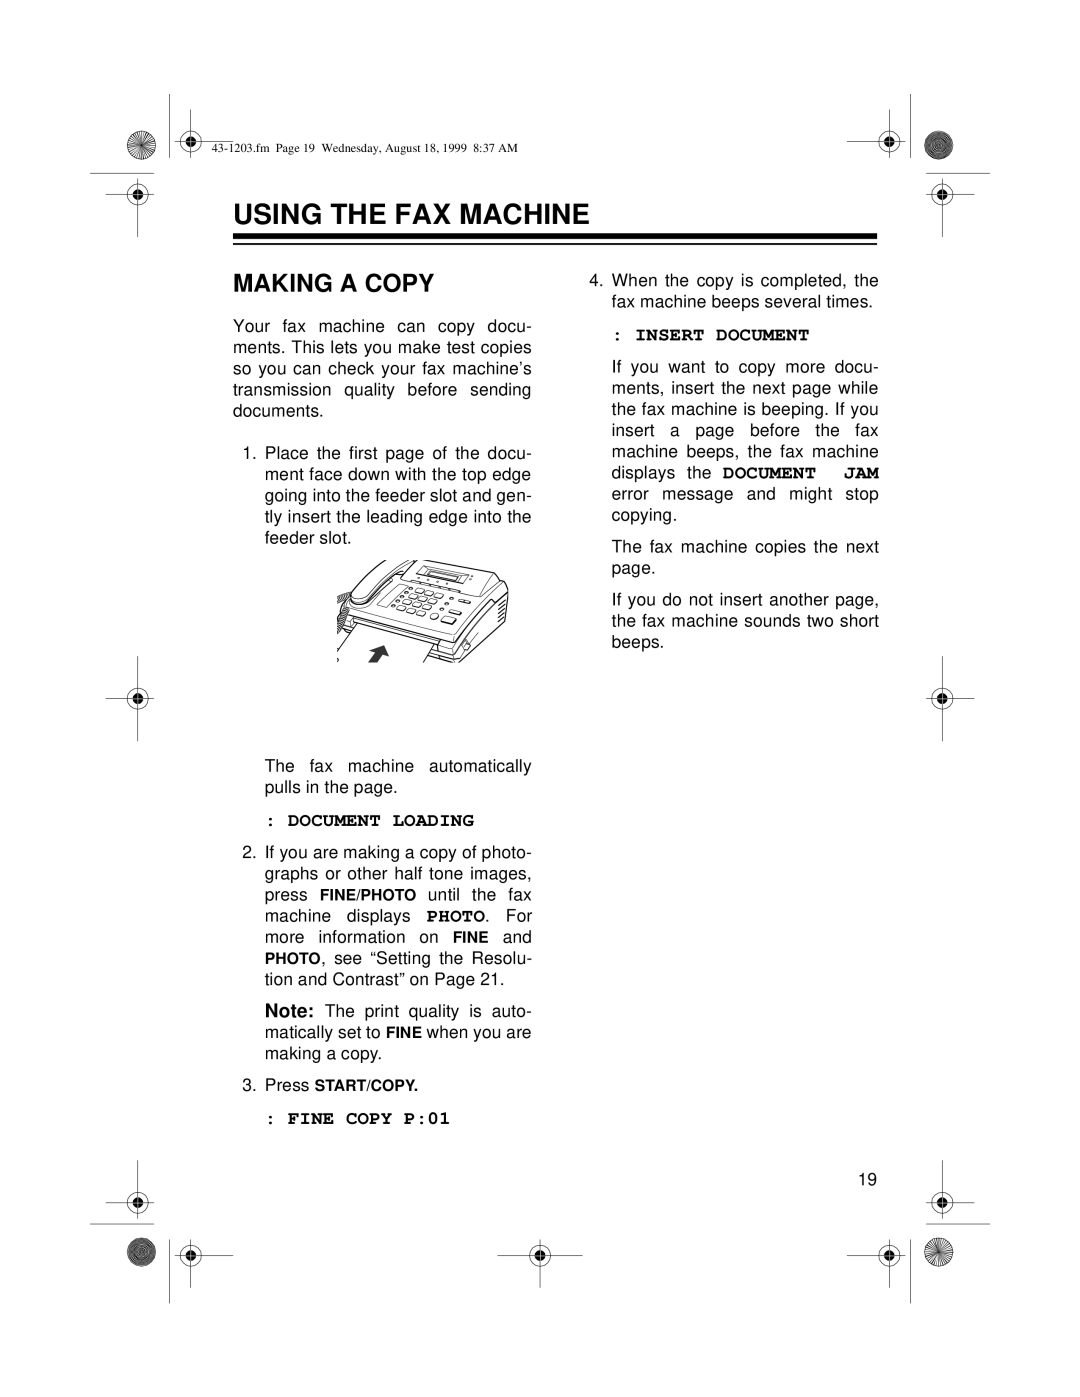 Radio Shack TFX-1031 owner manual Using The Fax Machine, Making A Copy, Insert Document, Document Loading, FINE COPY P01 